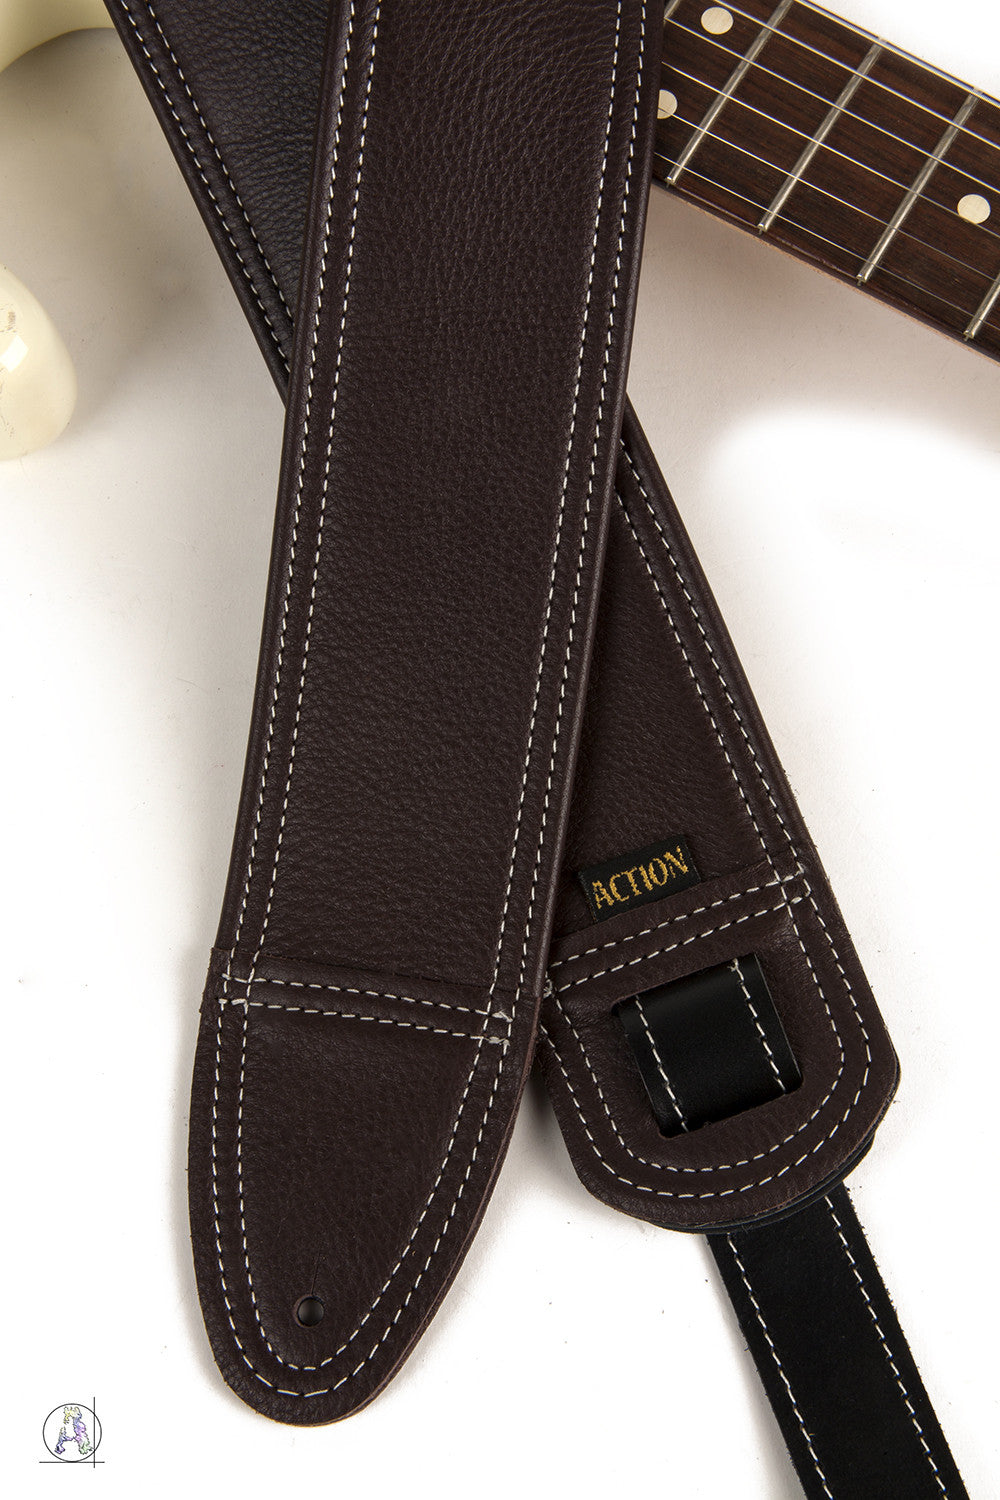 Simply Classy Brown with Bone Stitching Custom Guitar Strap